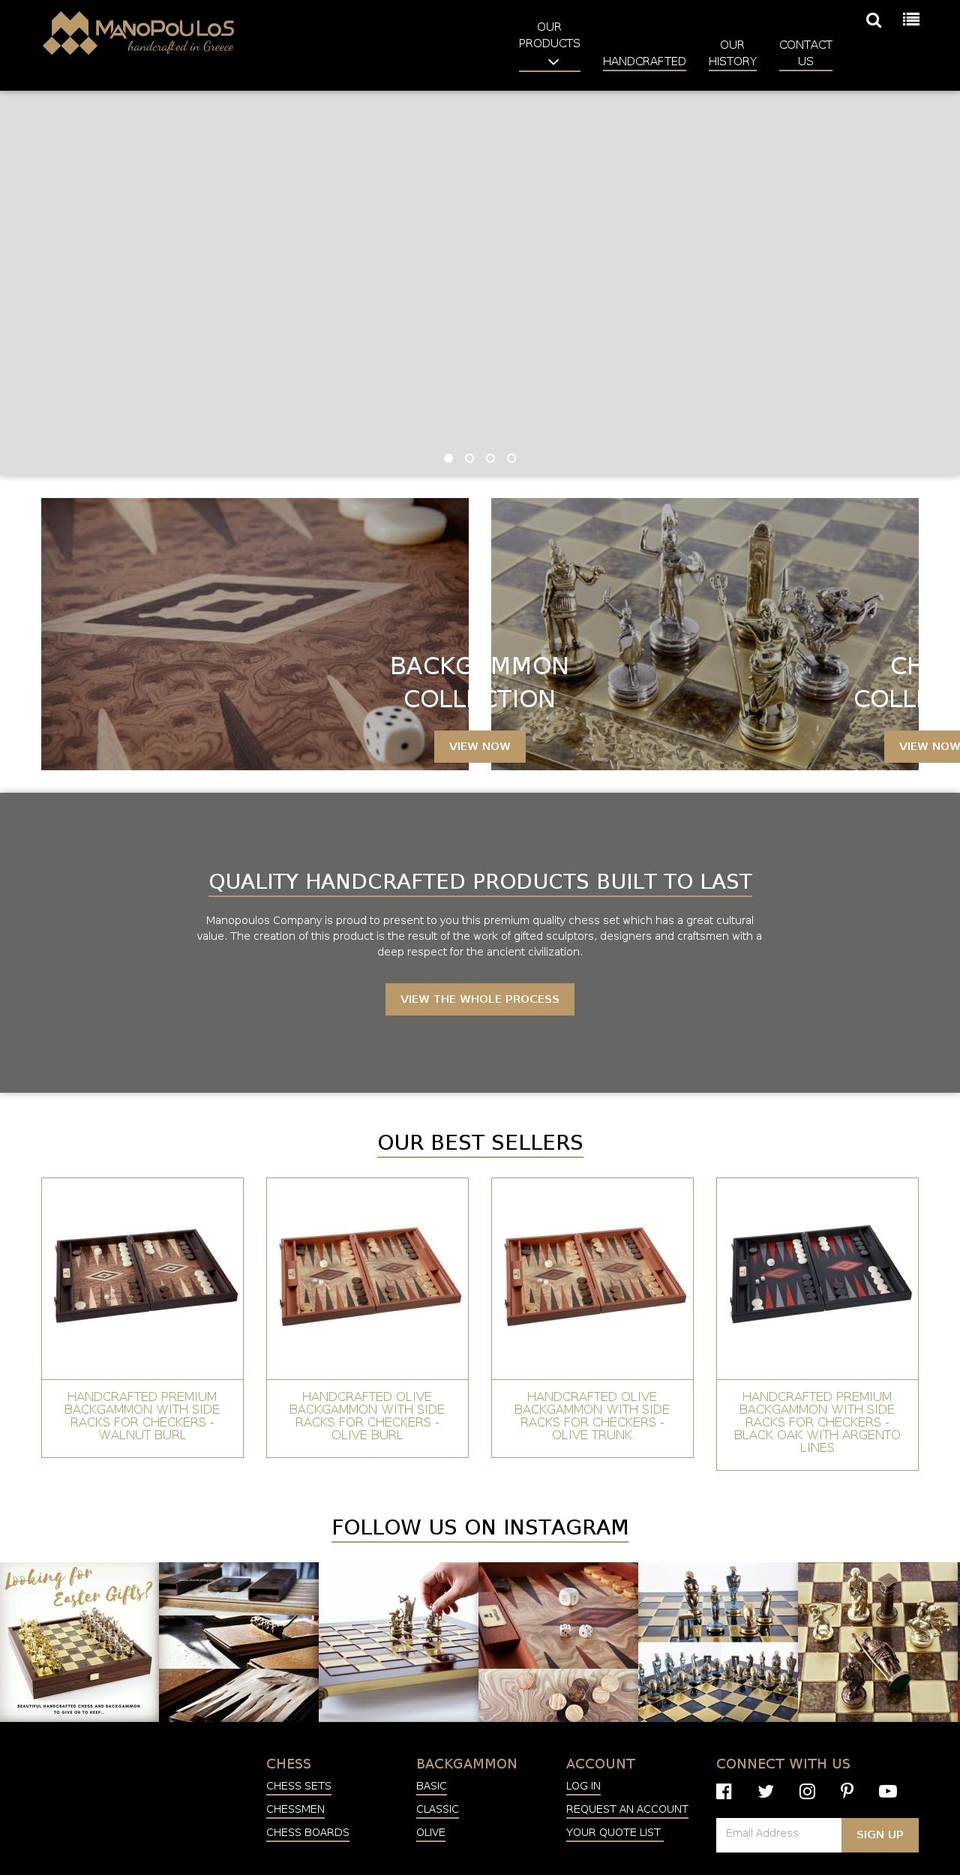 Label Shopify theme site example manopoulos.com